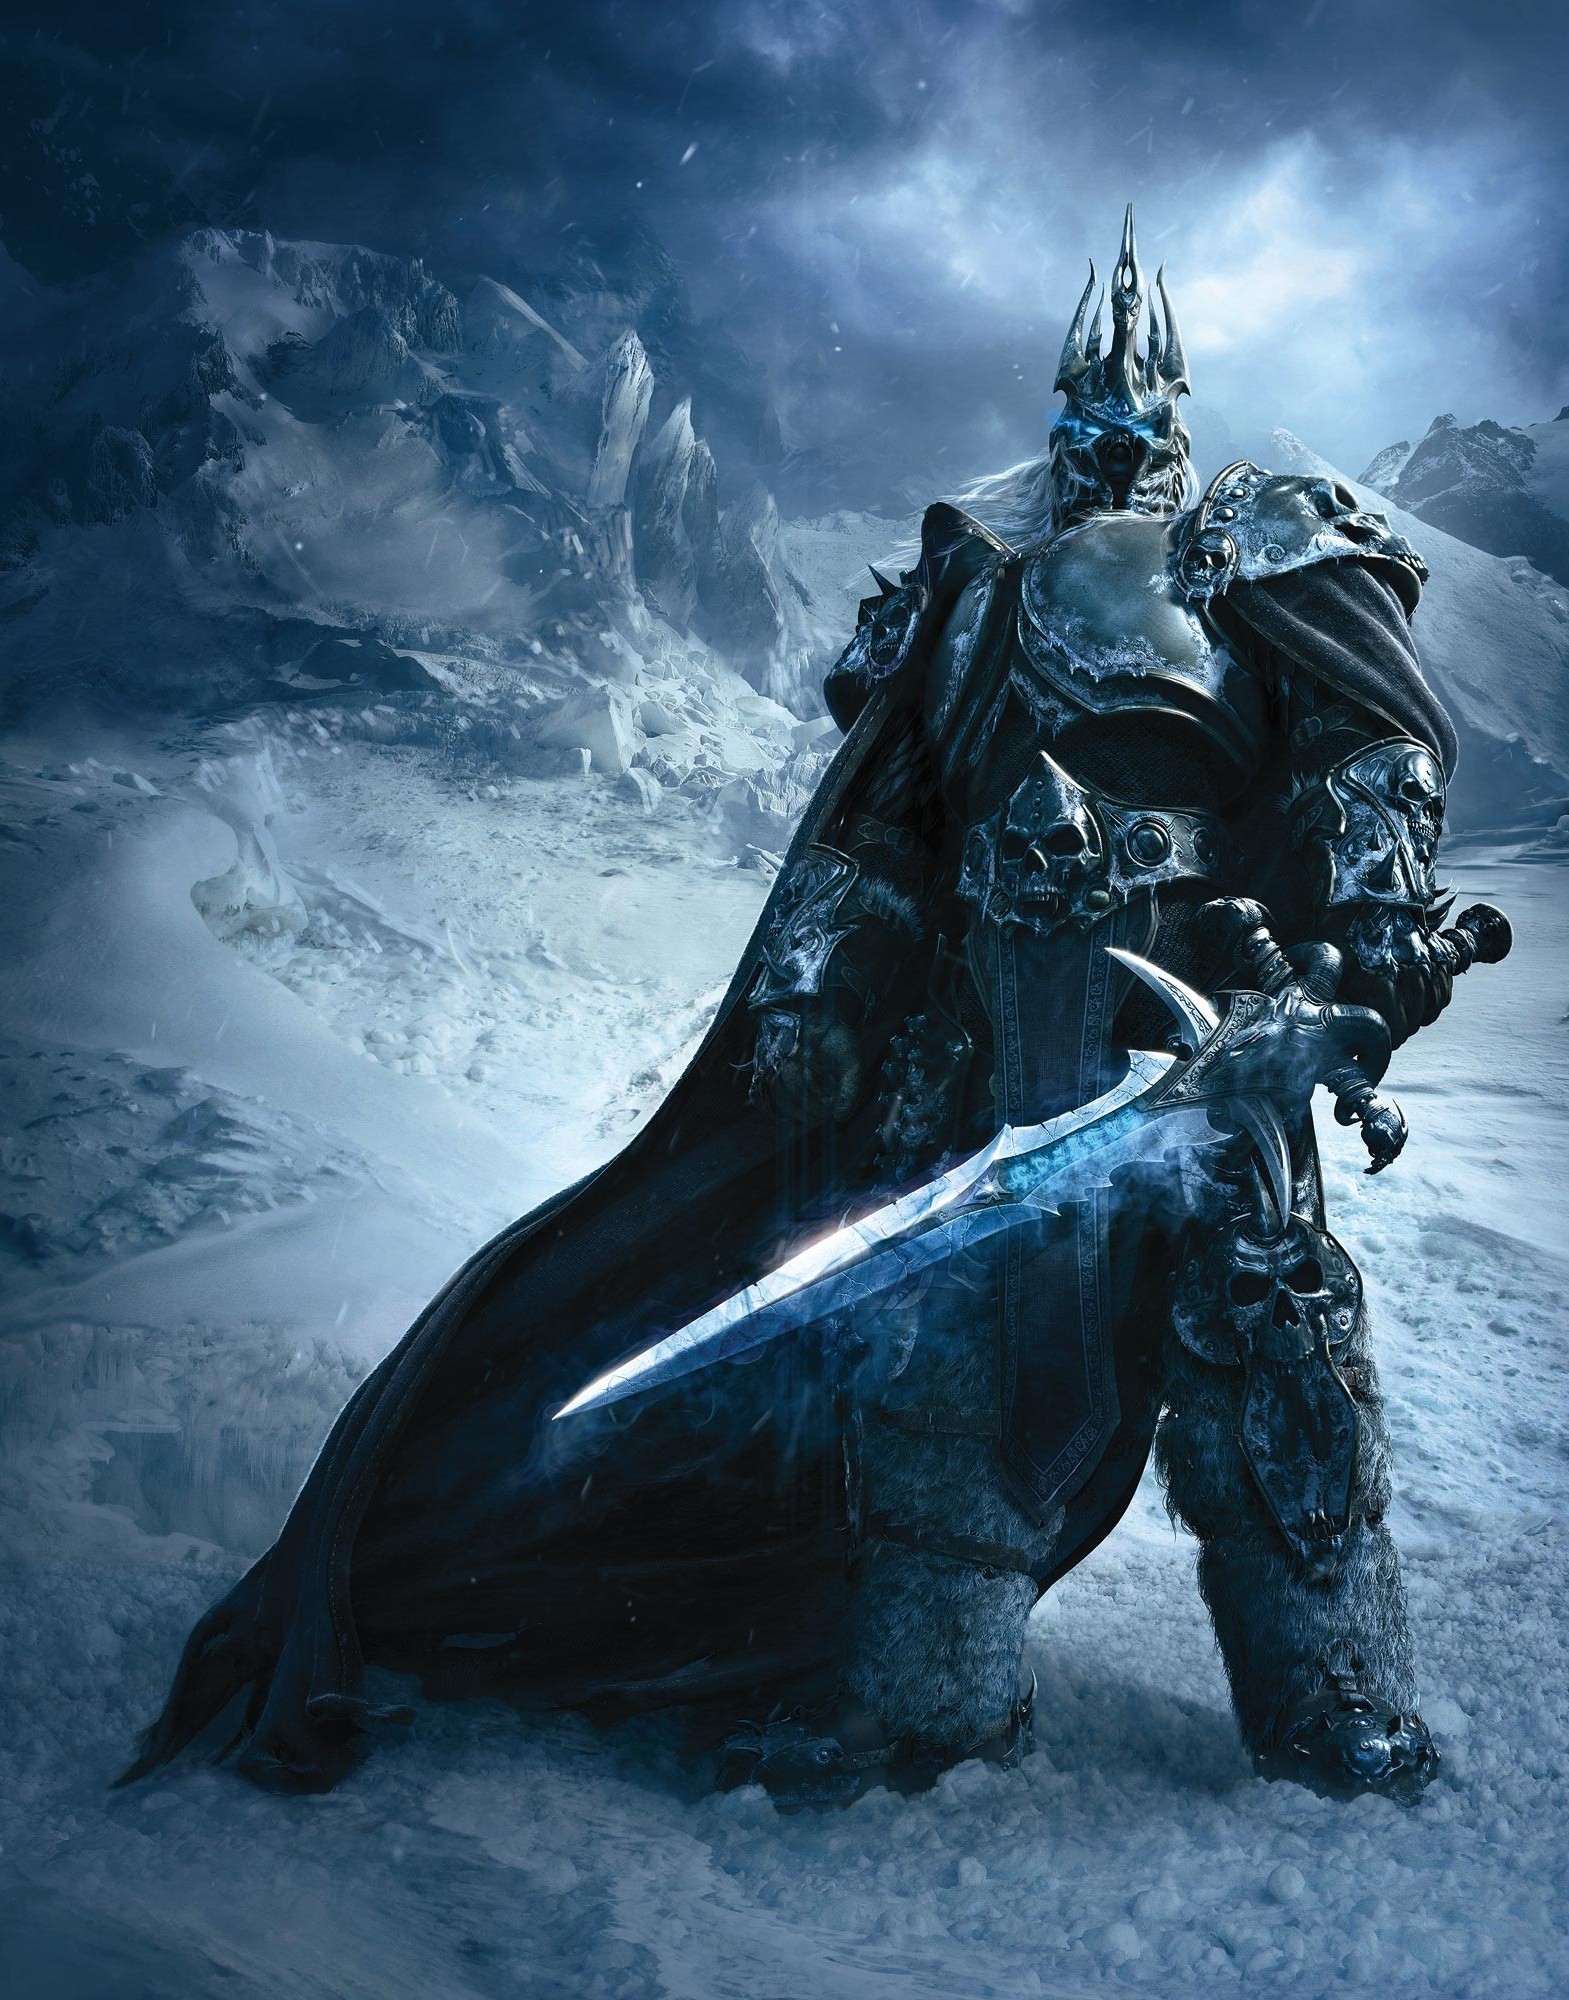 World Of Warcraft: Wrath Of The Lich King, World Of Warcraft Wallpaper